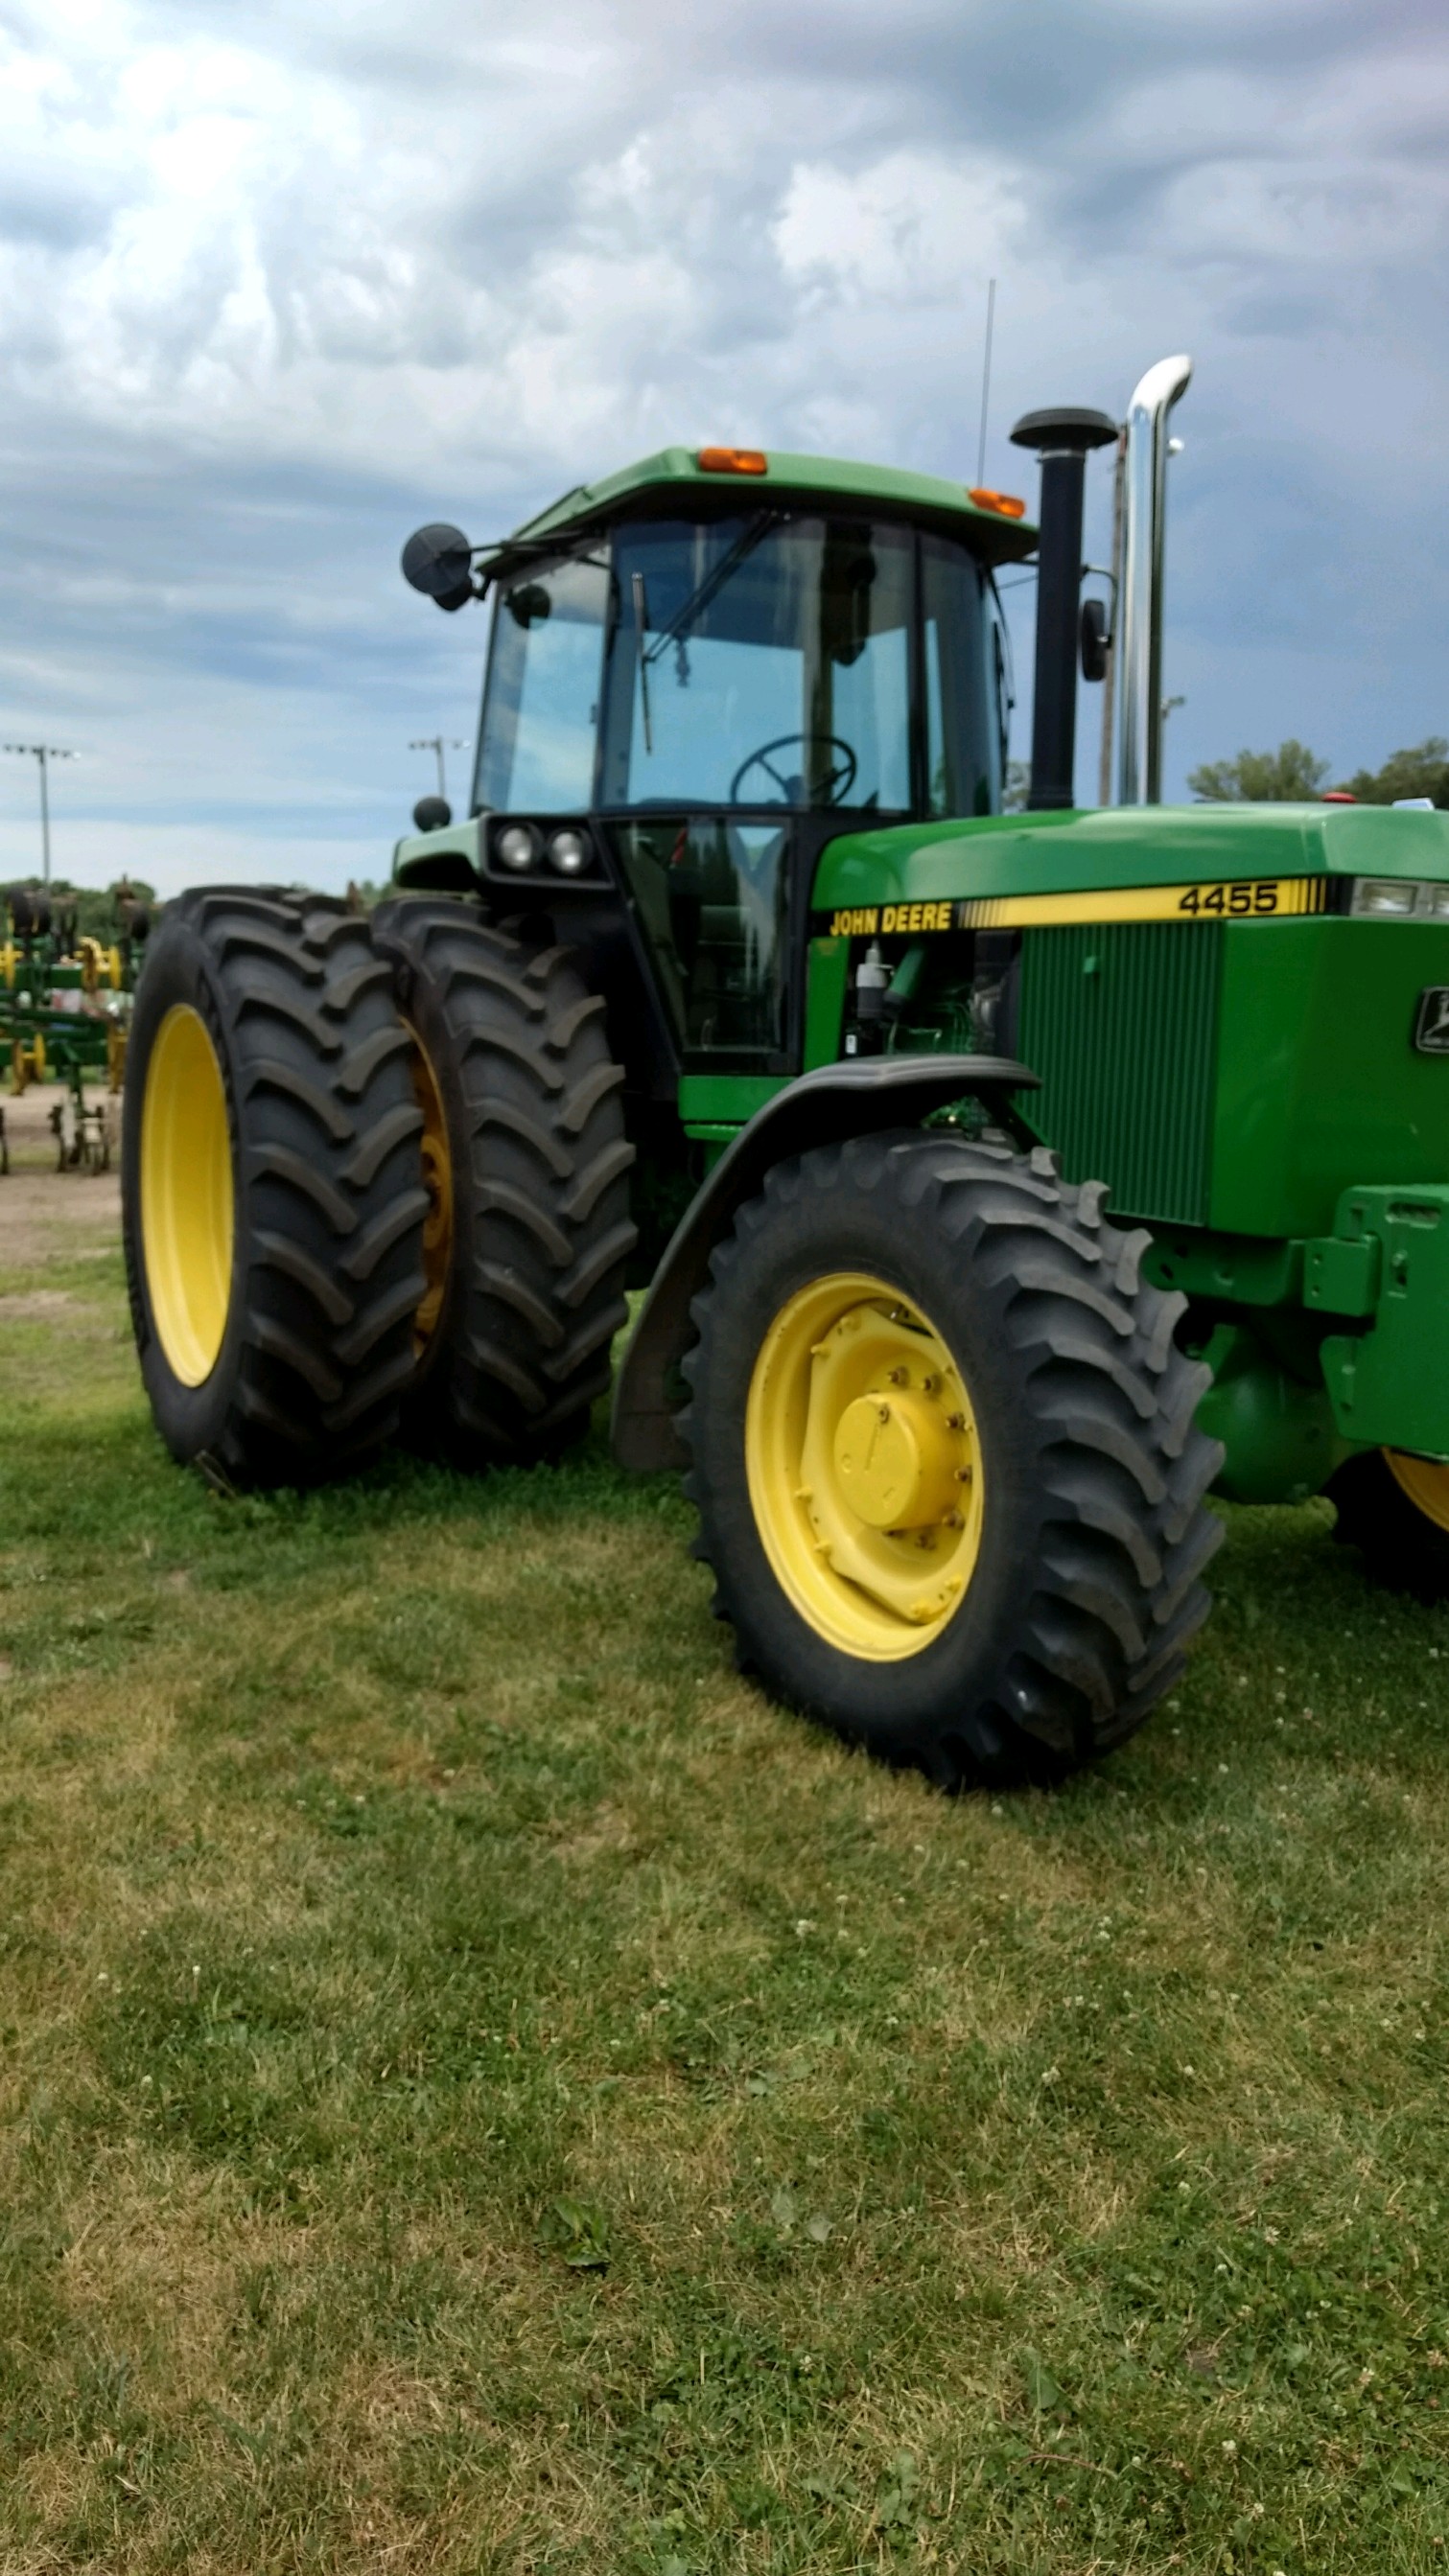 John Deere 4440 and 4455 Tractors Sell Strong on Iowa Auction Yesterday